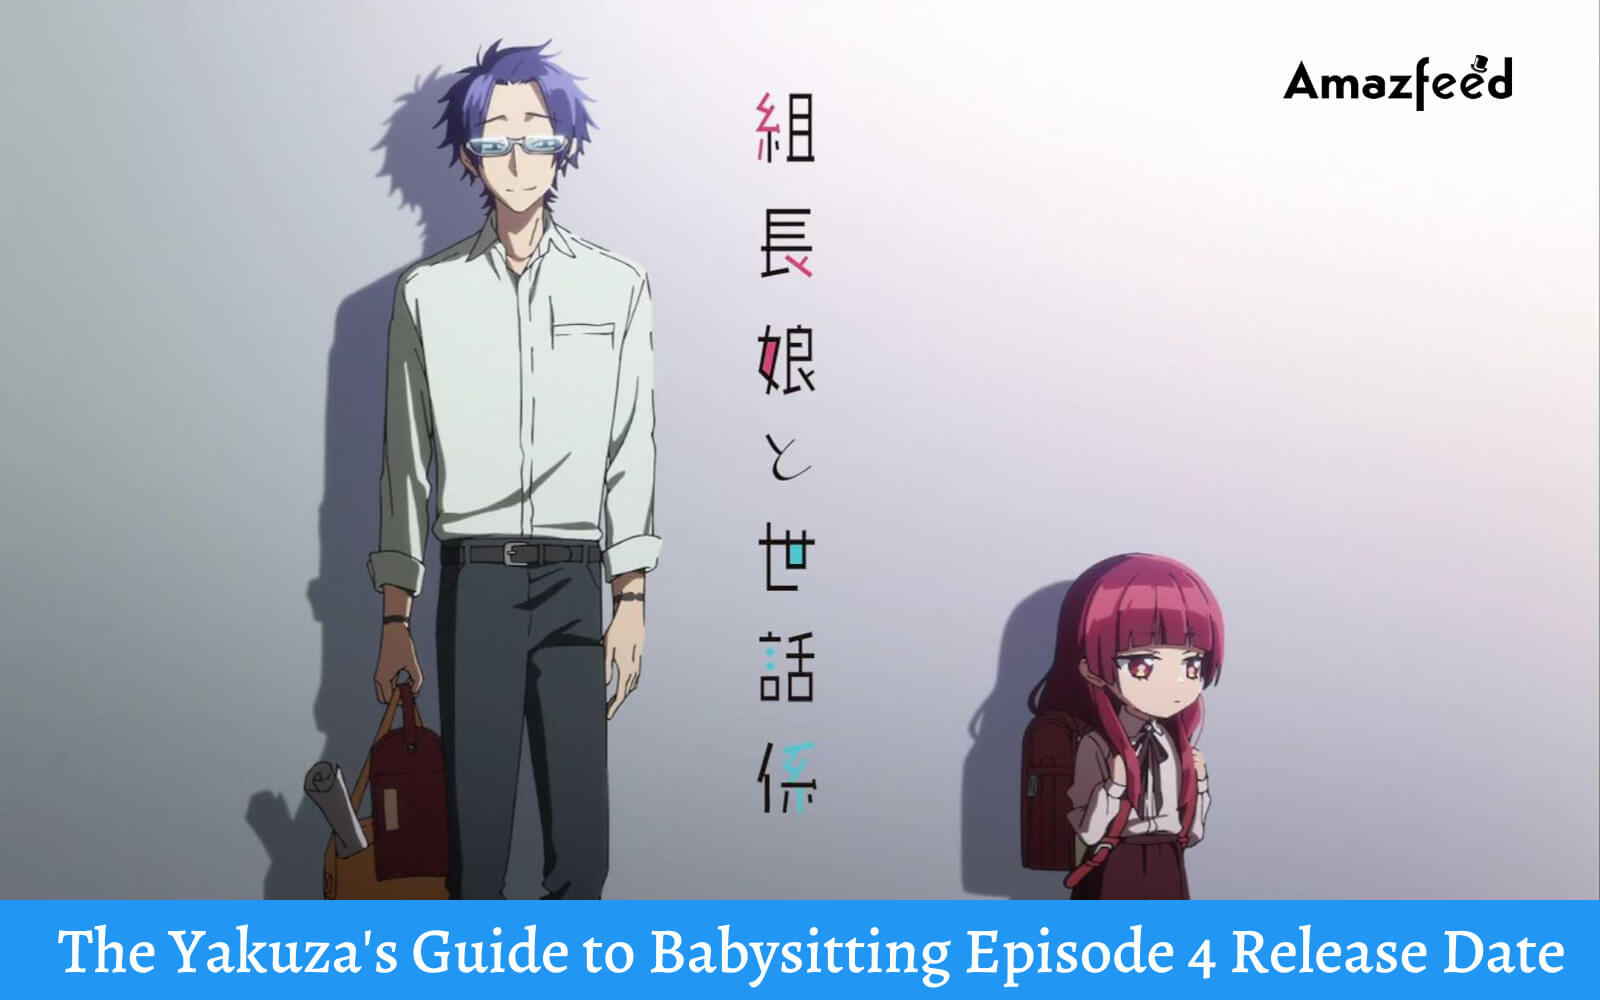 The Yakuza's Guide to Babysitting Episode 4 Release Date